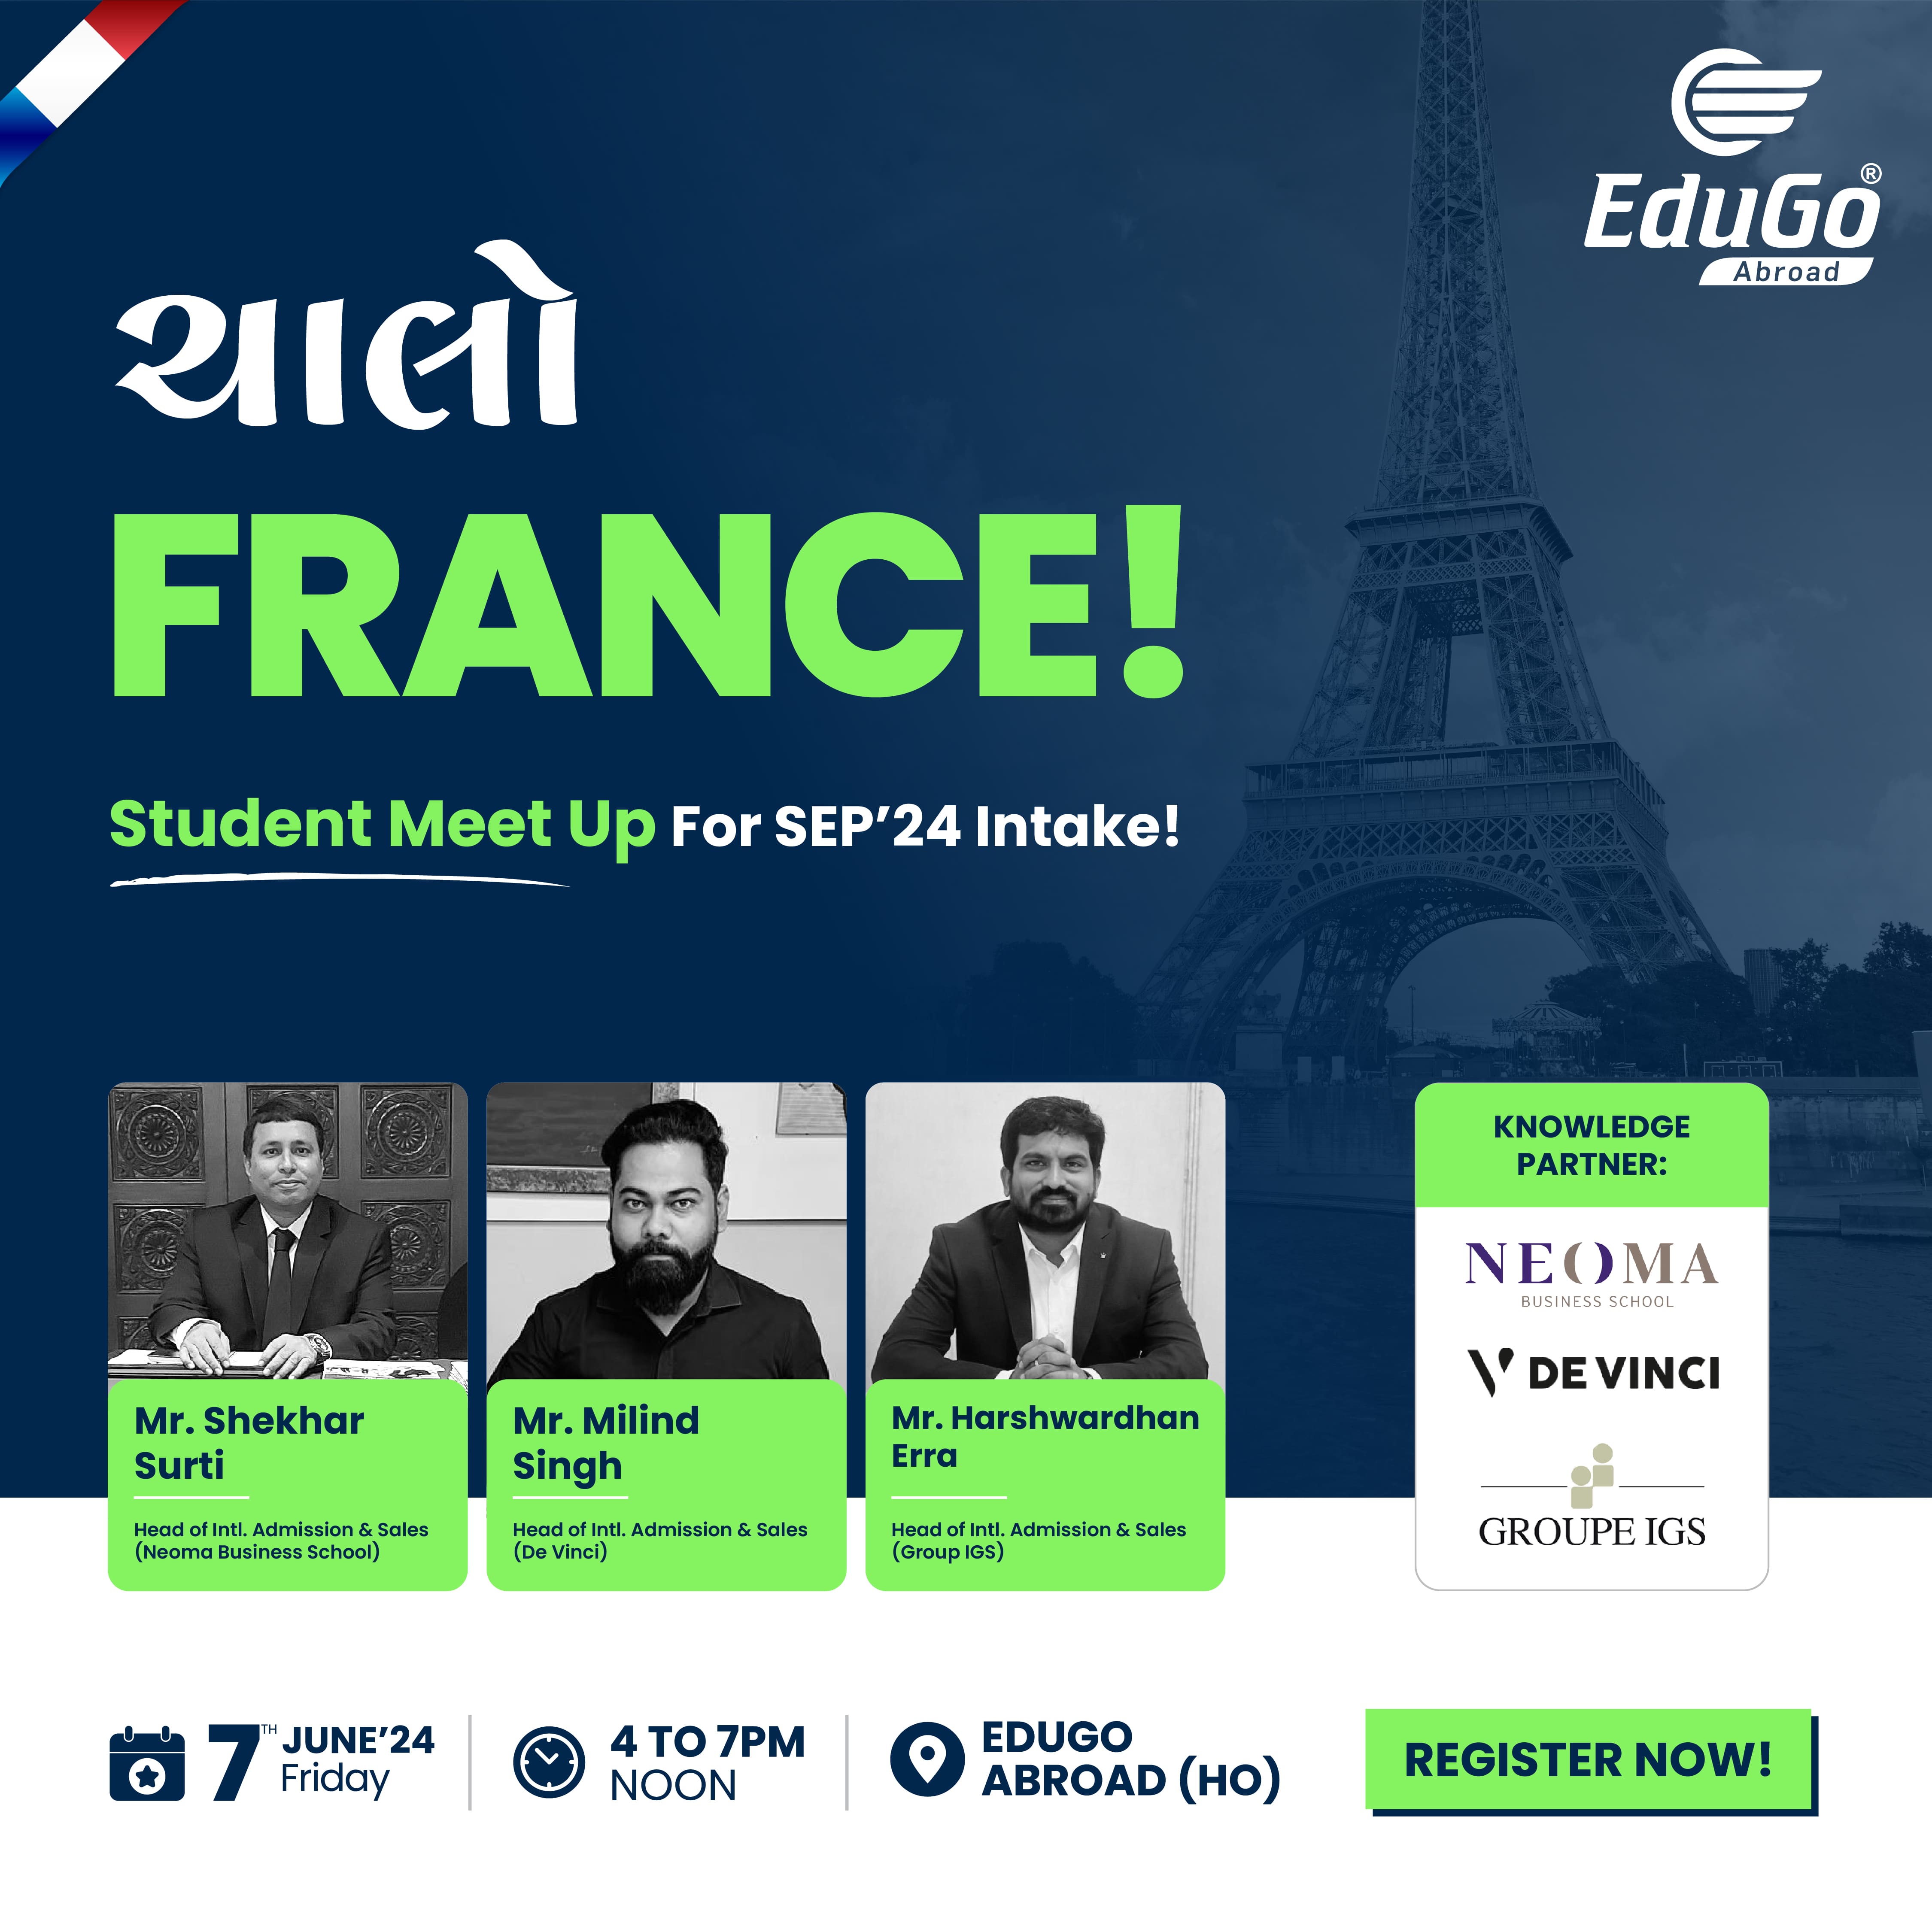 Chalo France - Student Meet Up in Ahmedabad for Sept '24 Intake!, Ahmedabad, Gujarat, India